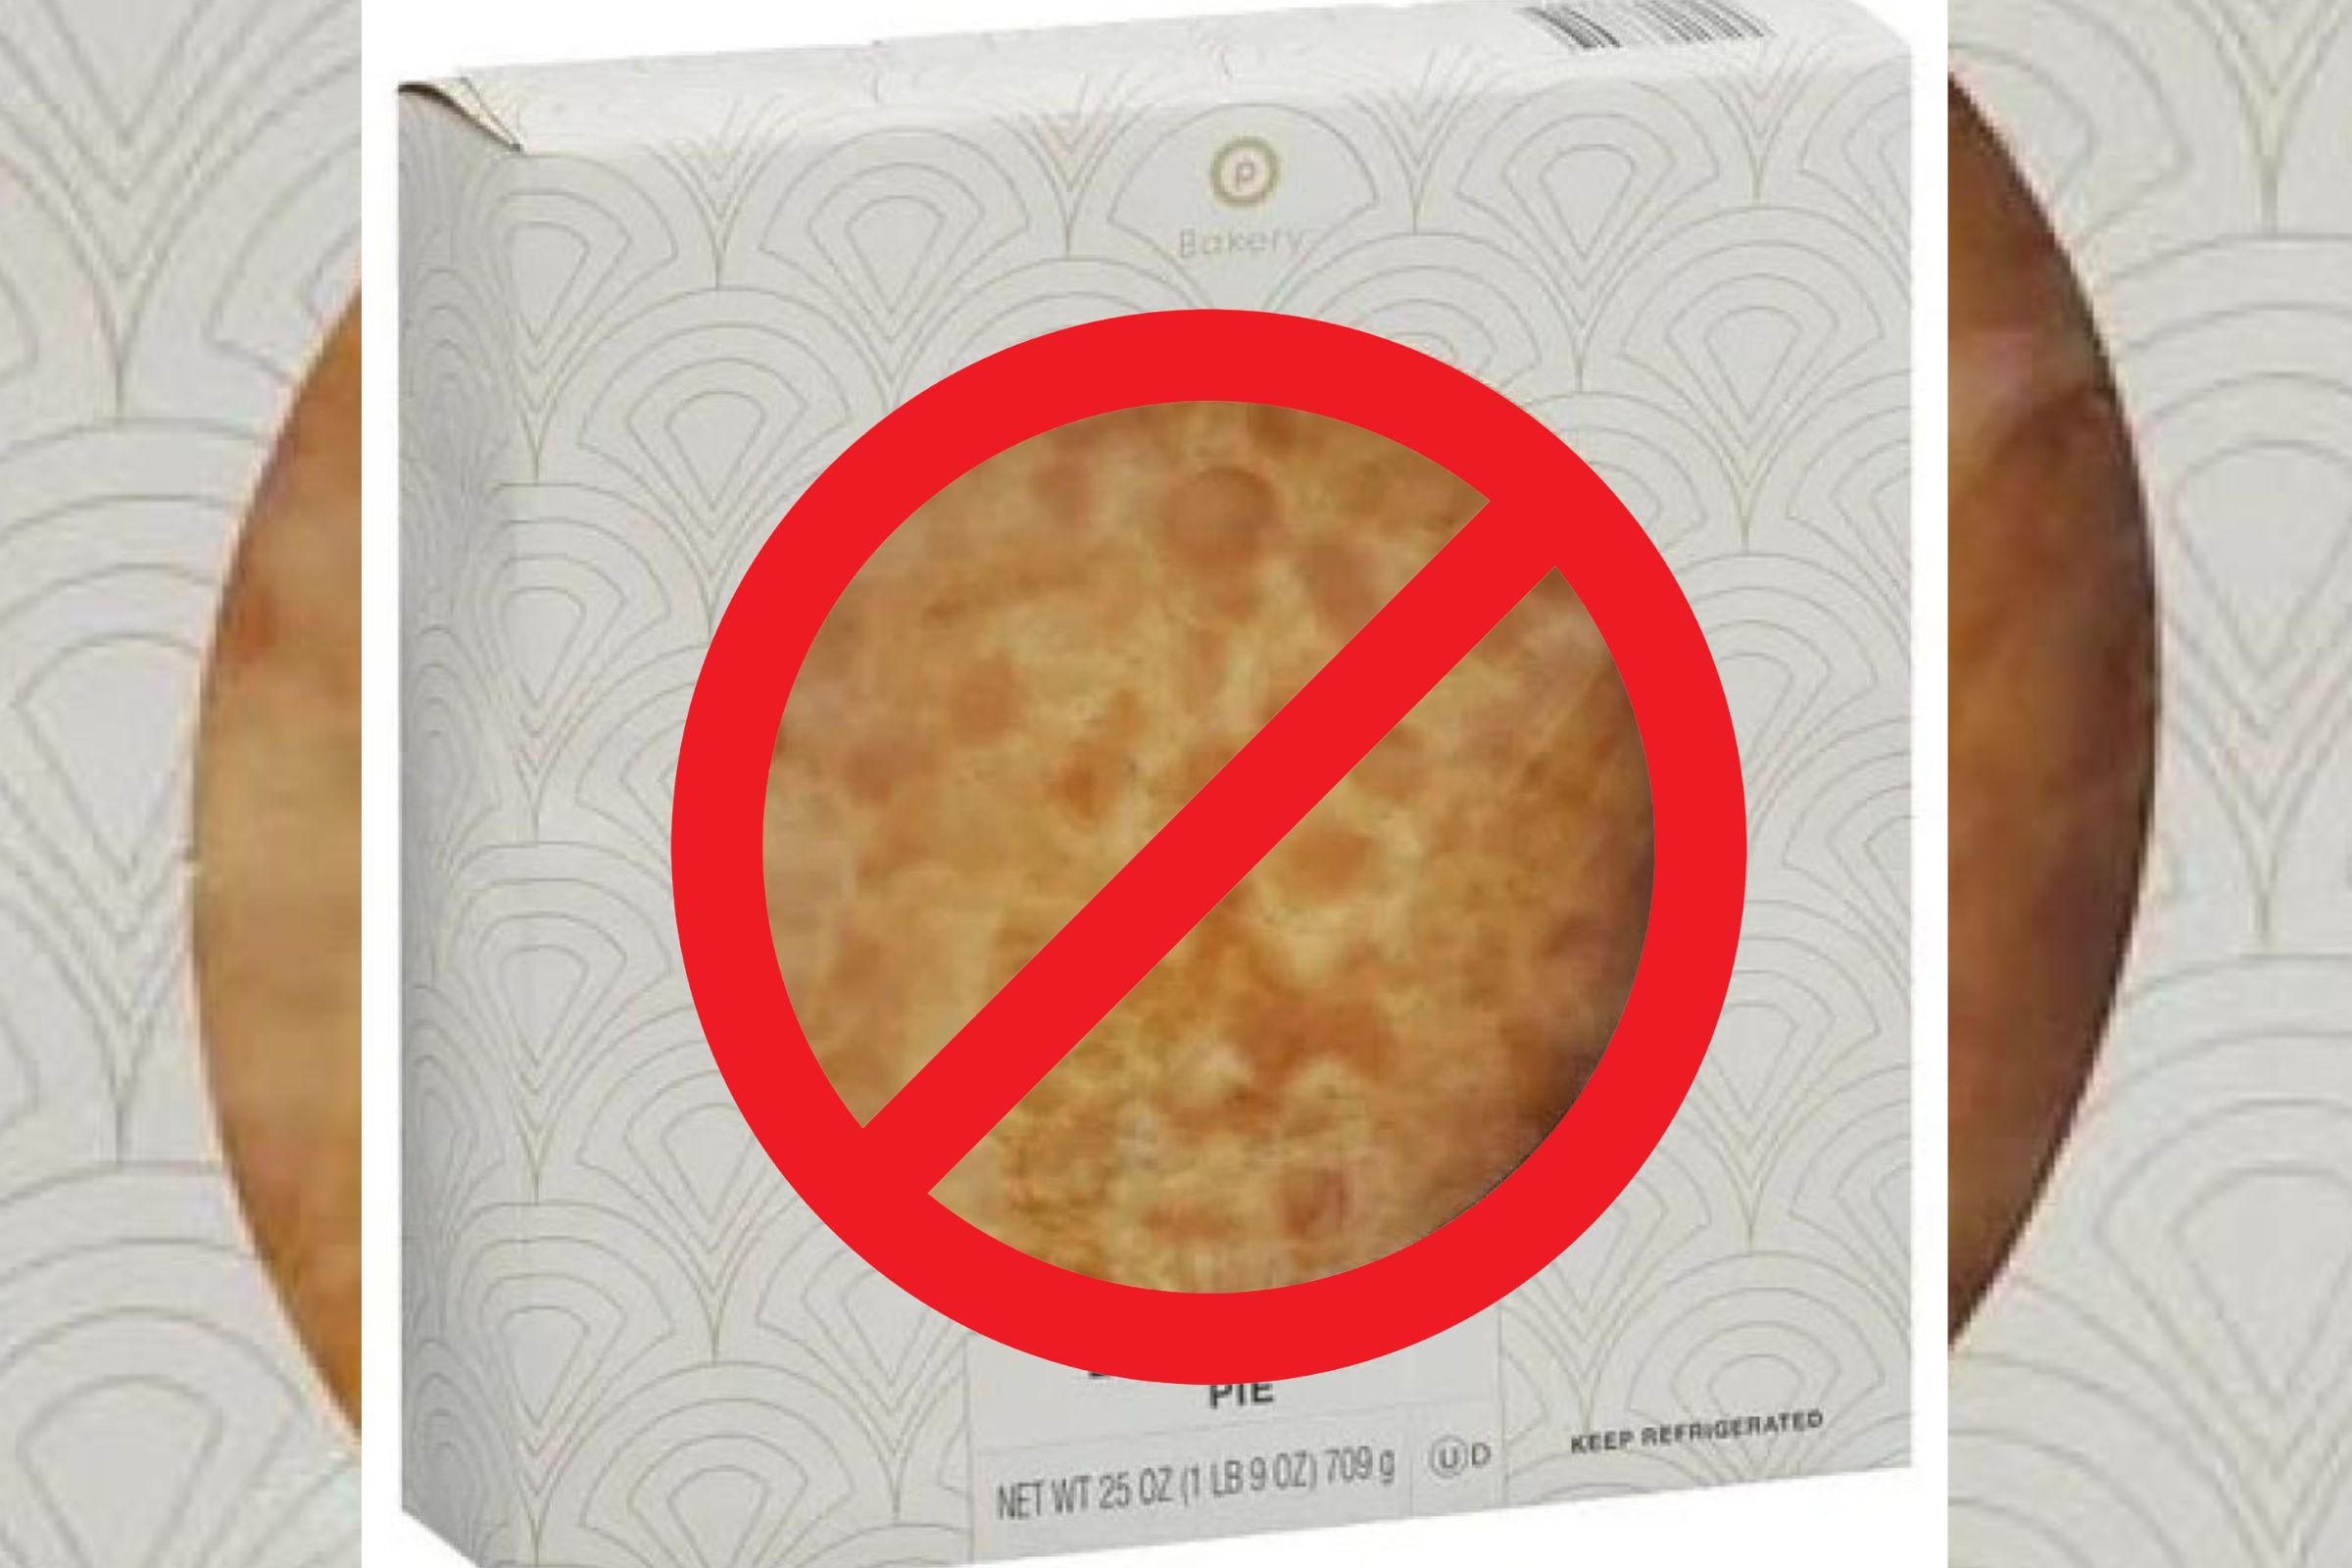 fda issues recall of pies sold at publix over 'life-threatening' allergens